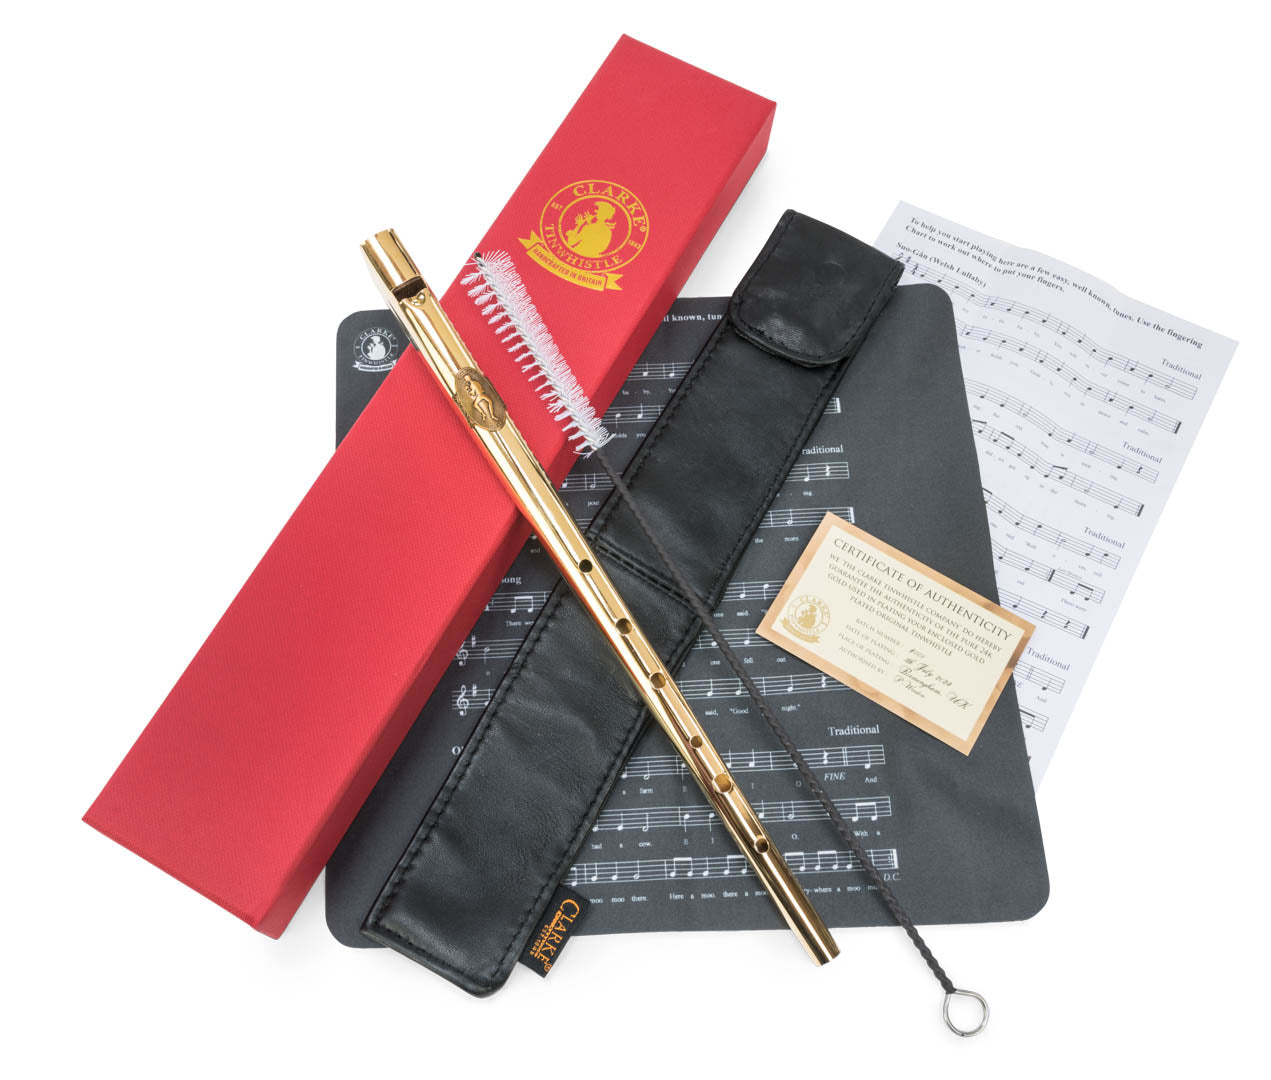 Clarke GOLD Plated Original D whistle Gift Set - AVAILABLE NOW